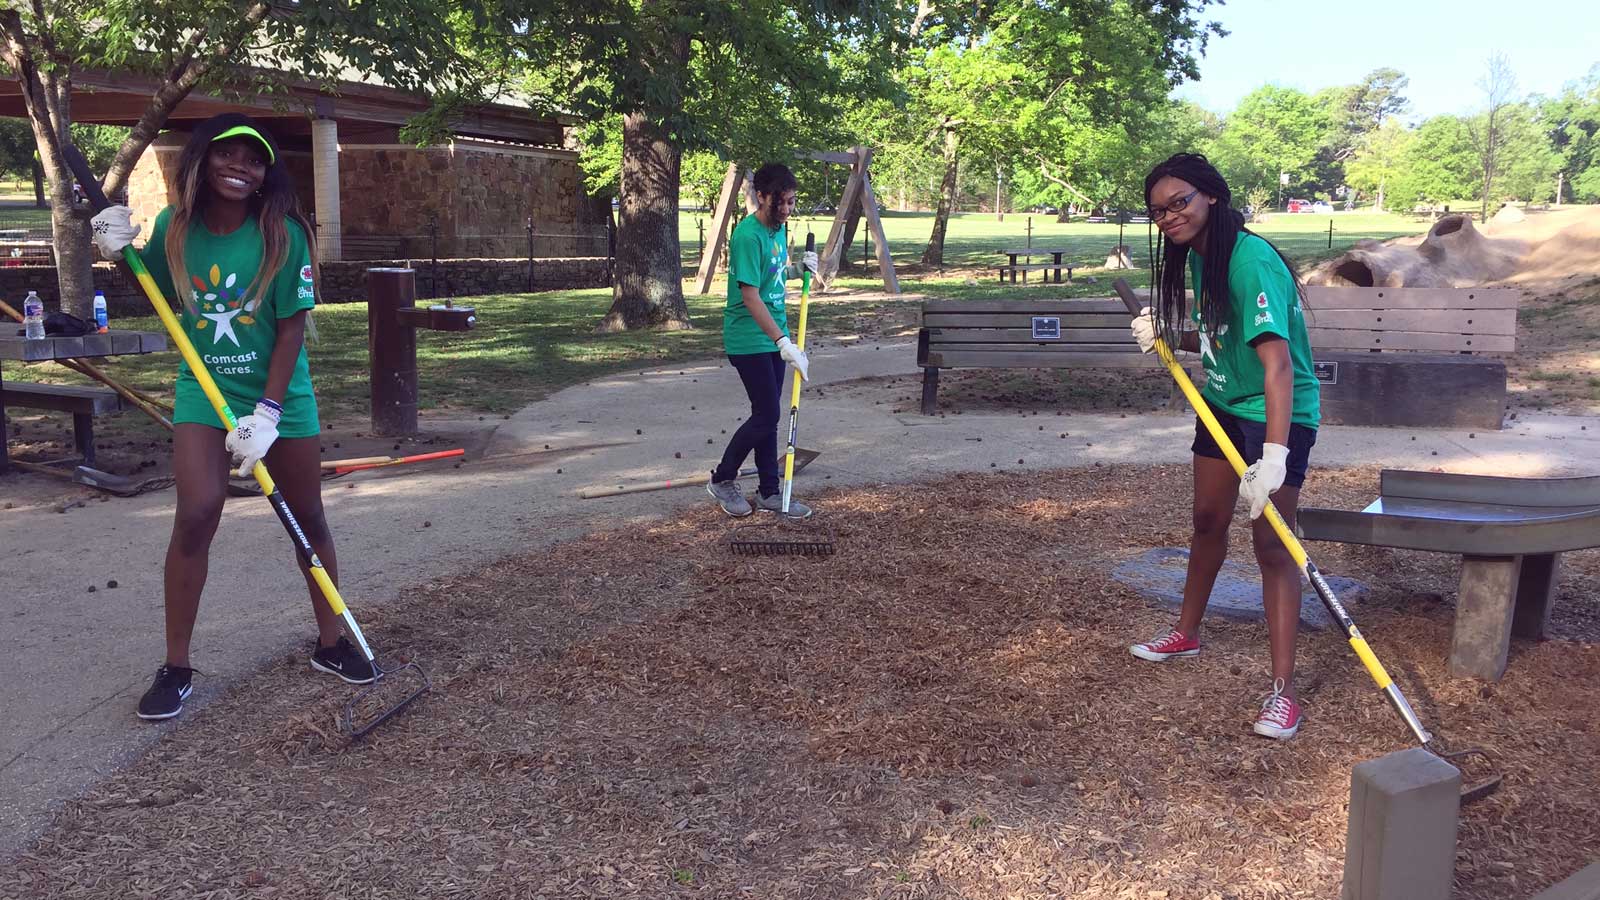 Comcast Cares Day volunteers in Overton Park